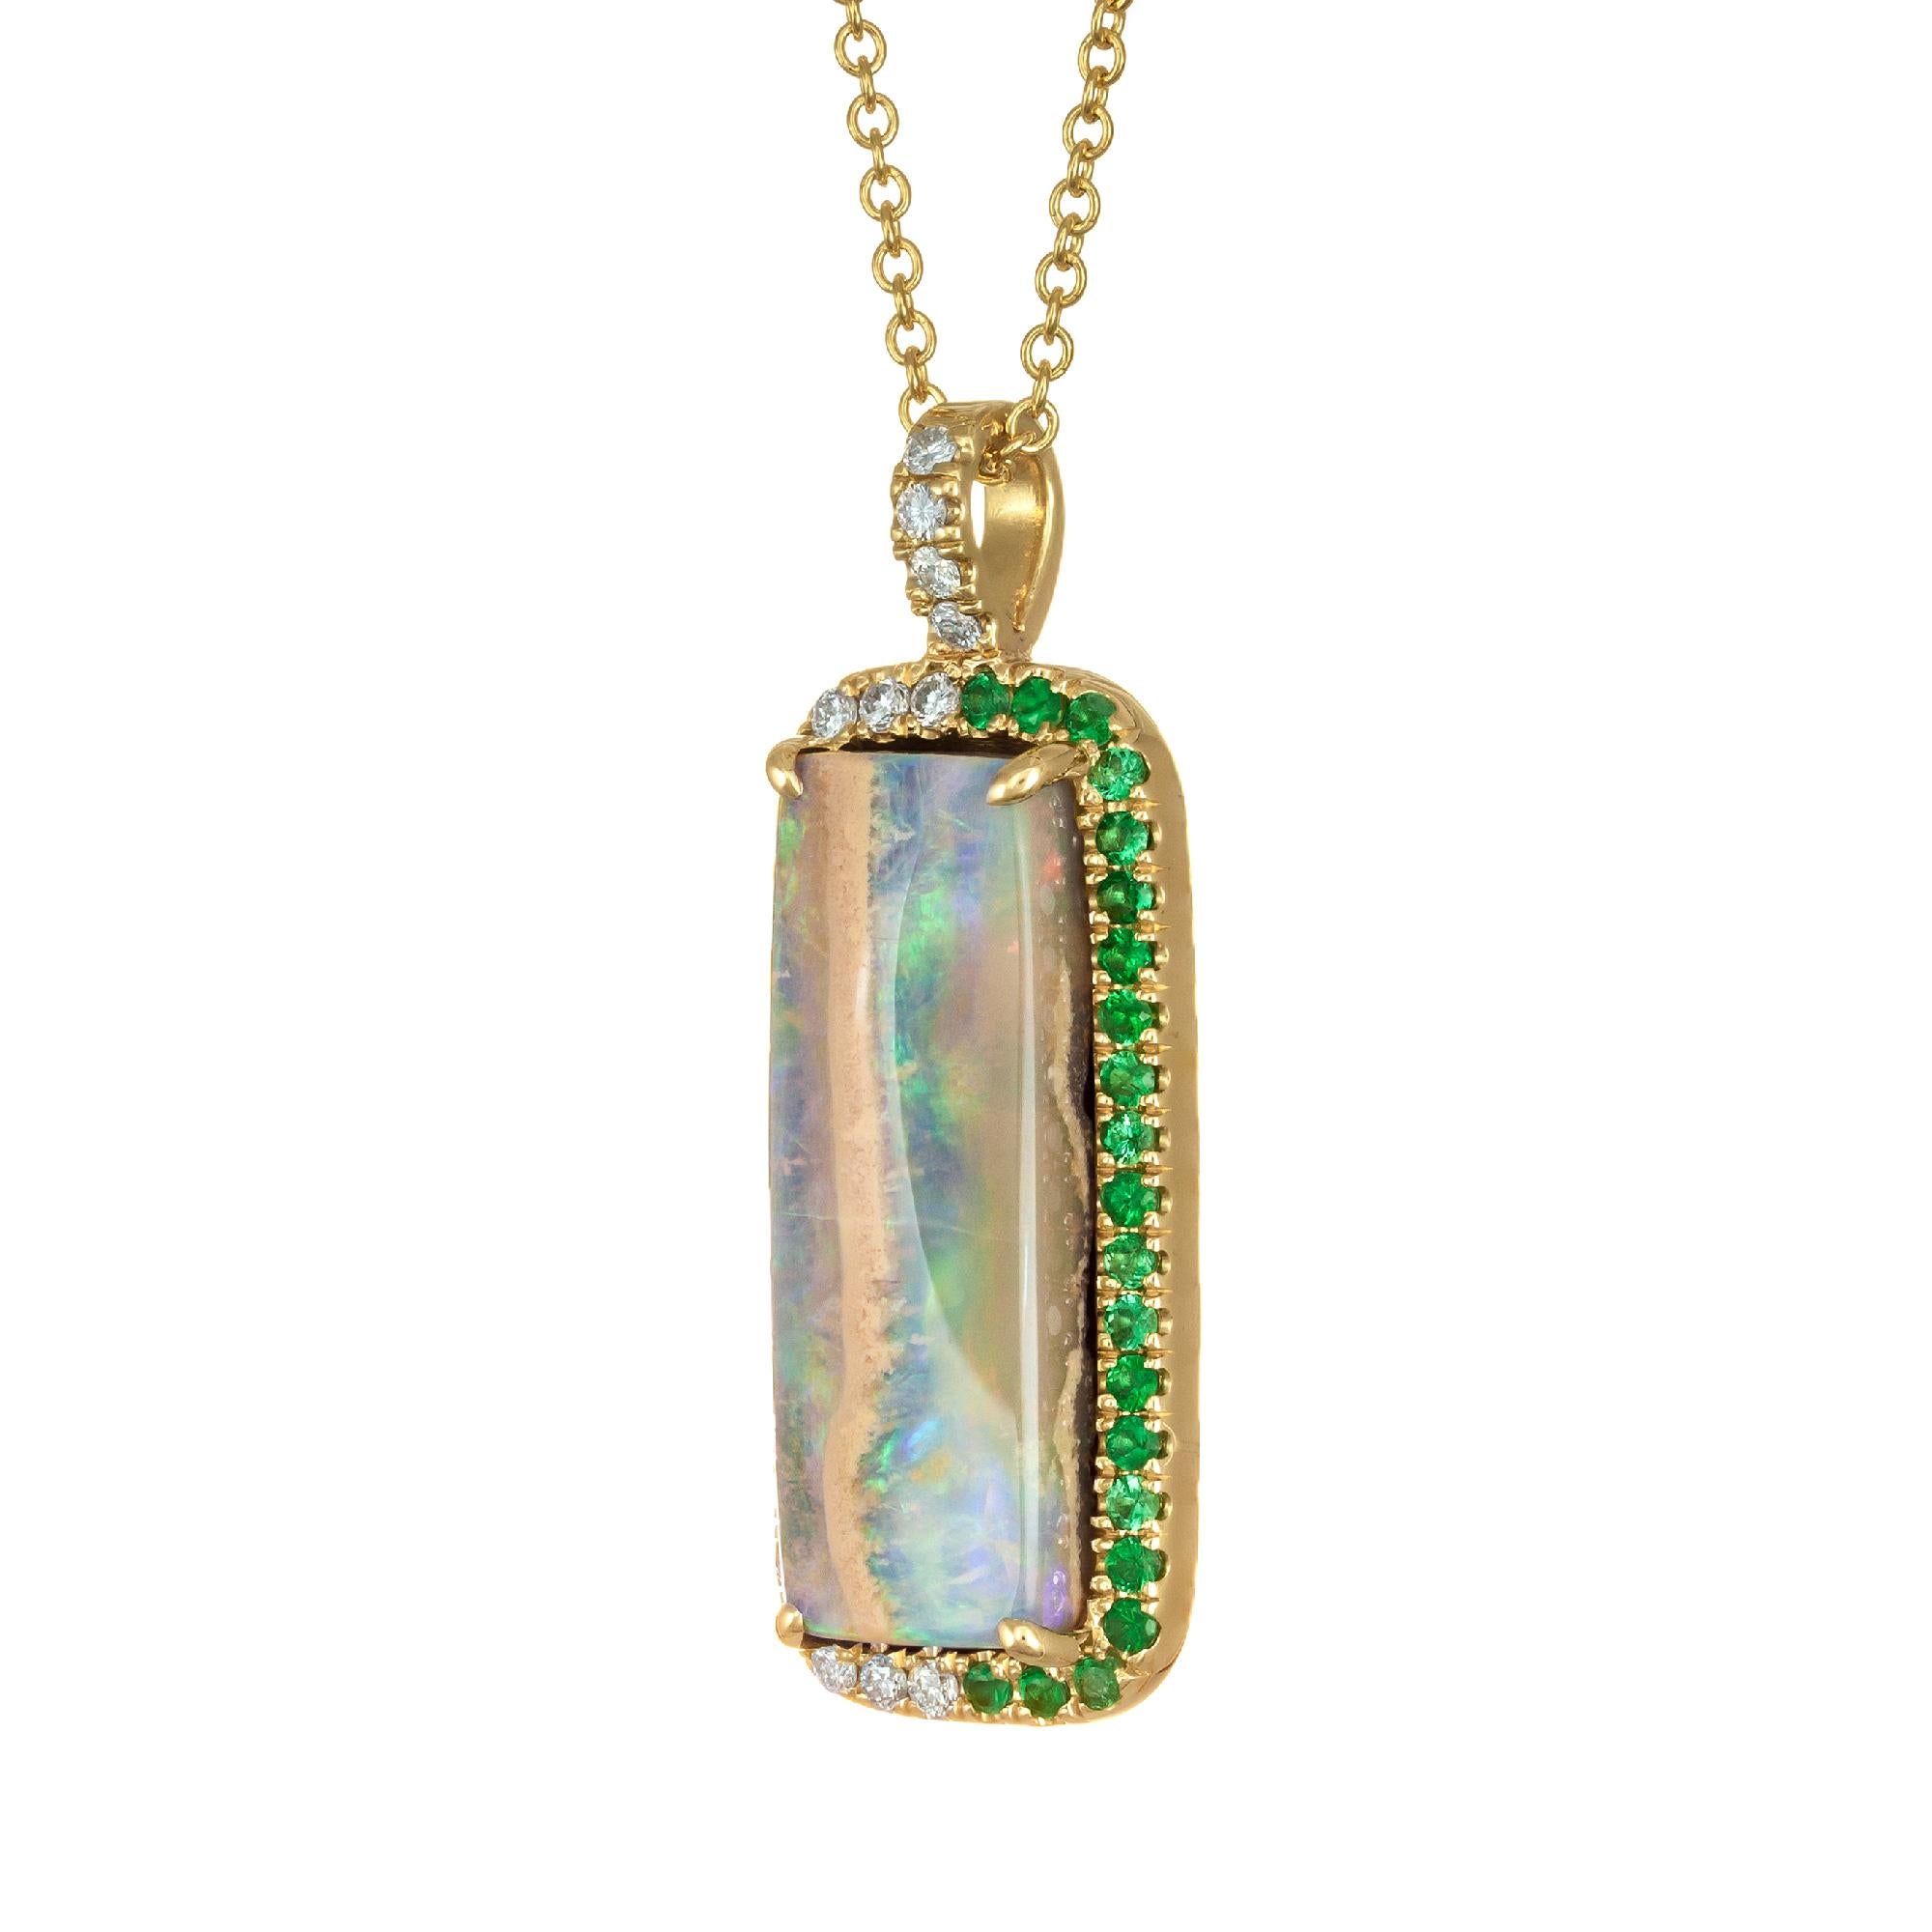 Green boulder opal from Australia. Natural and untreated with a micro pave diamond and emerald halo in 14k yellow gold.  From the Peter Suchy workshop

1 rectangular (red orange blue green) black opal, approx. 7.32ct
25 round brilliant cut diamonds